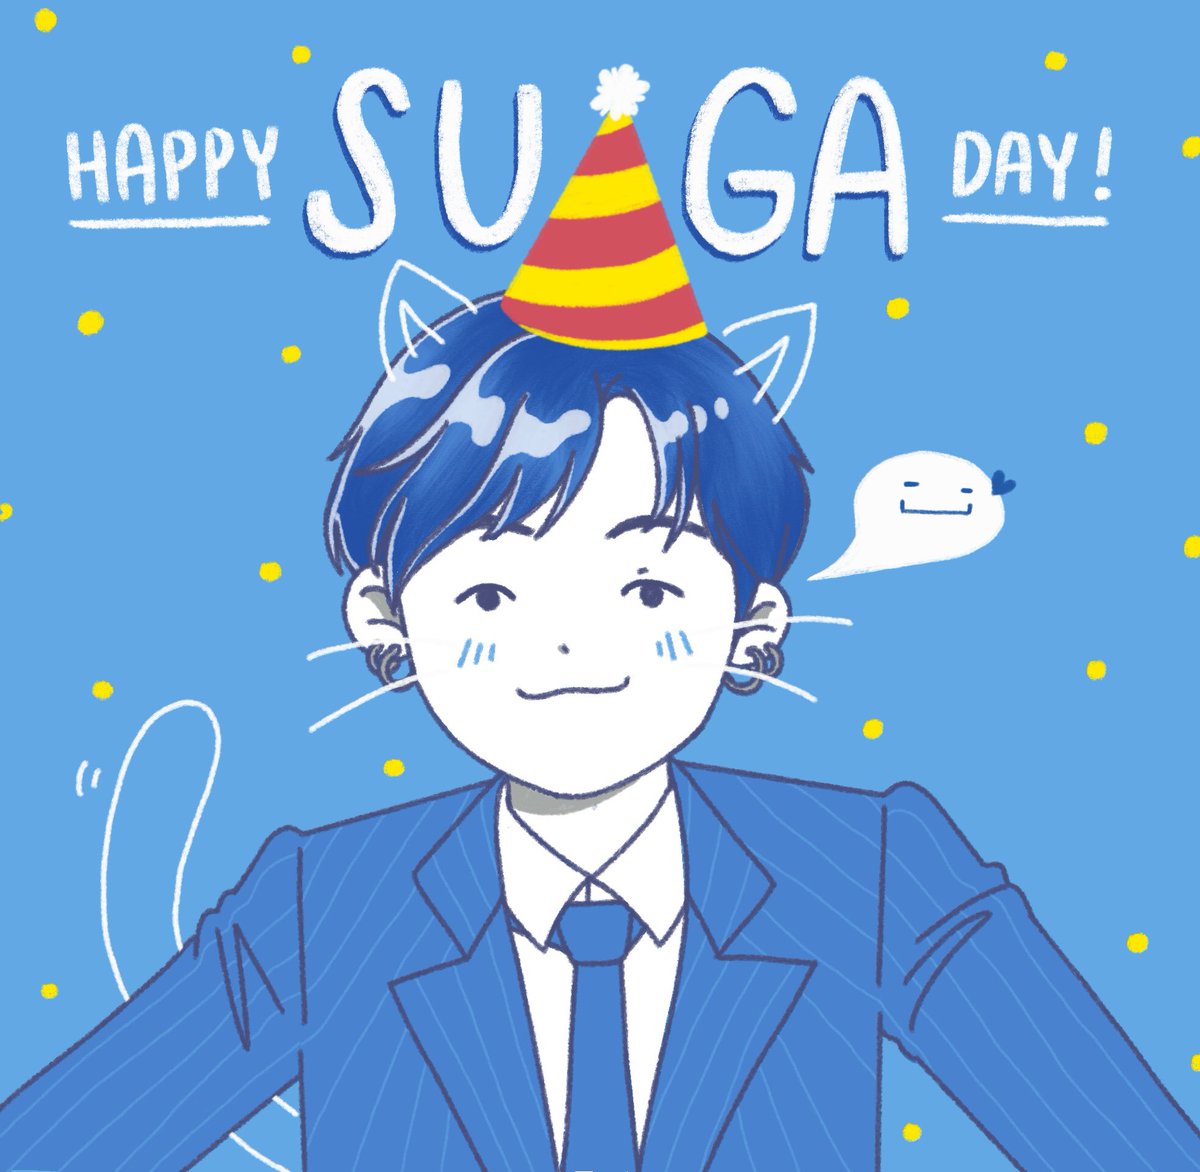 Happy birthday to this man and this man only 🥳 We love you 💜 @BTS_twt
.
.
#AlwaysWithYoongi #ThatSameMoonlight #OurFirstLoveSUGA #OurGeniusMinPD #윤기는우리의자랑이야  #happySUGAday